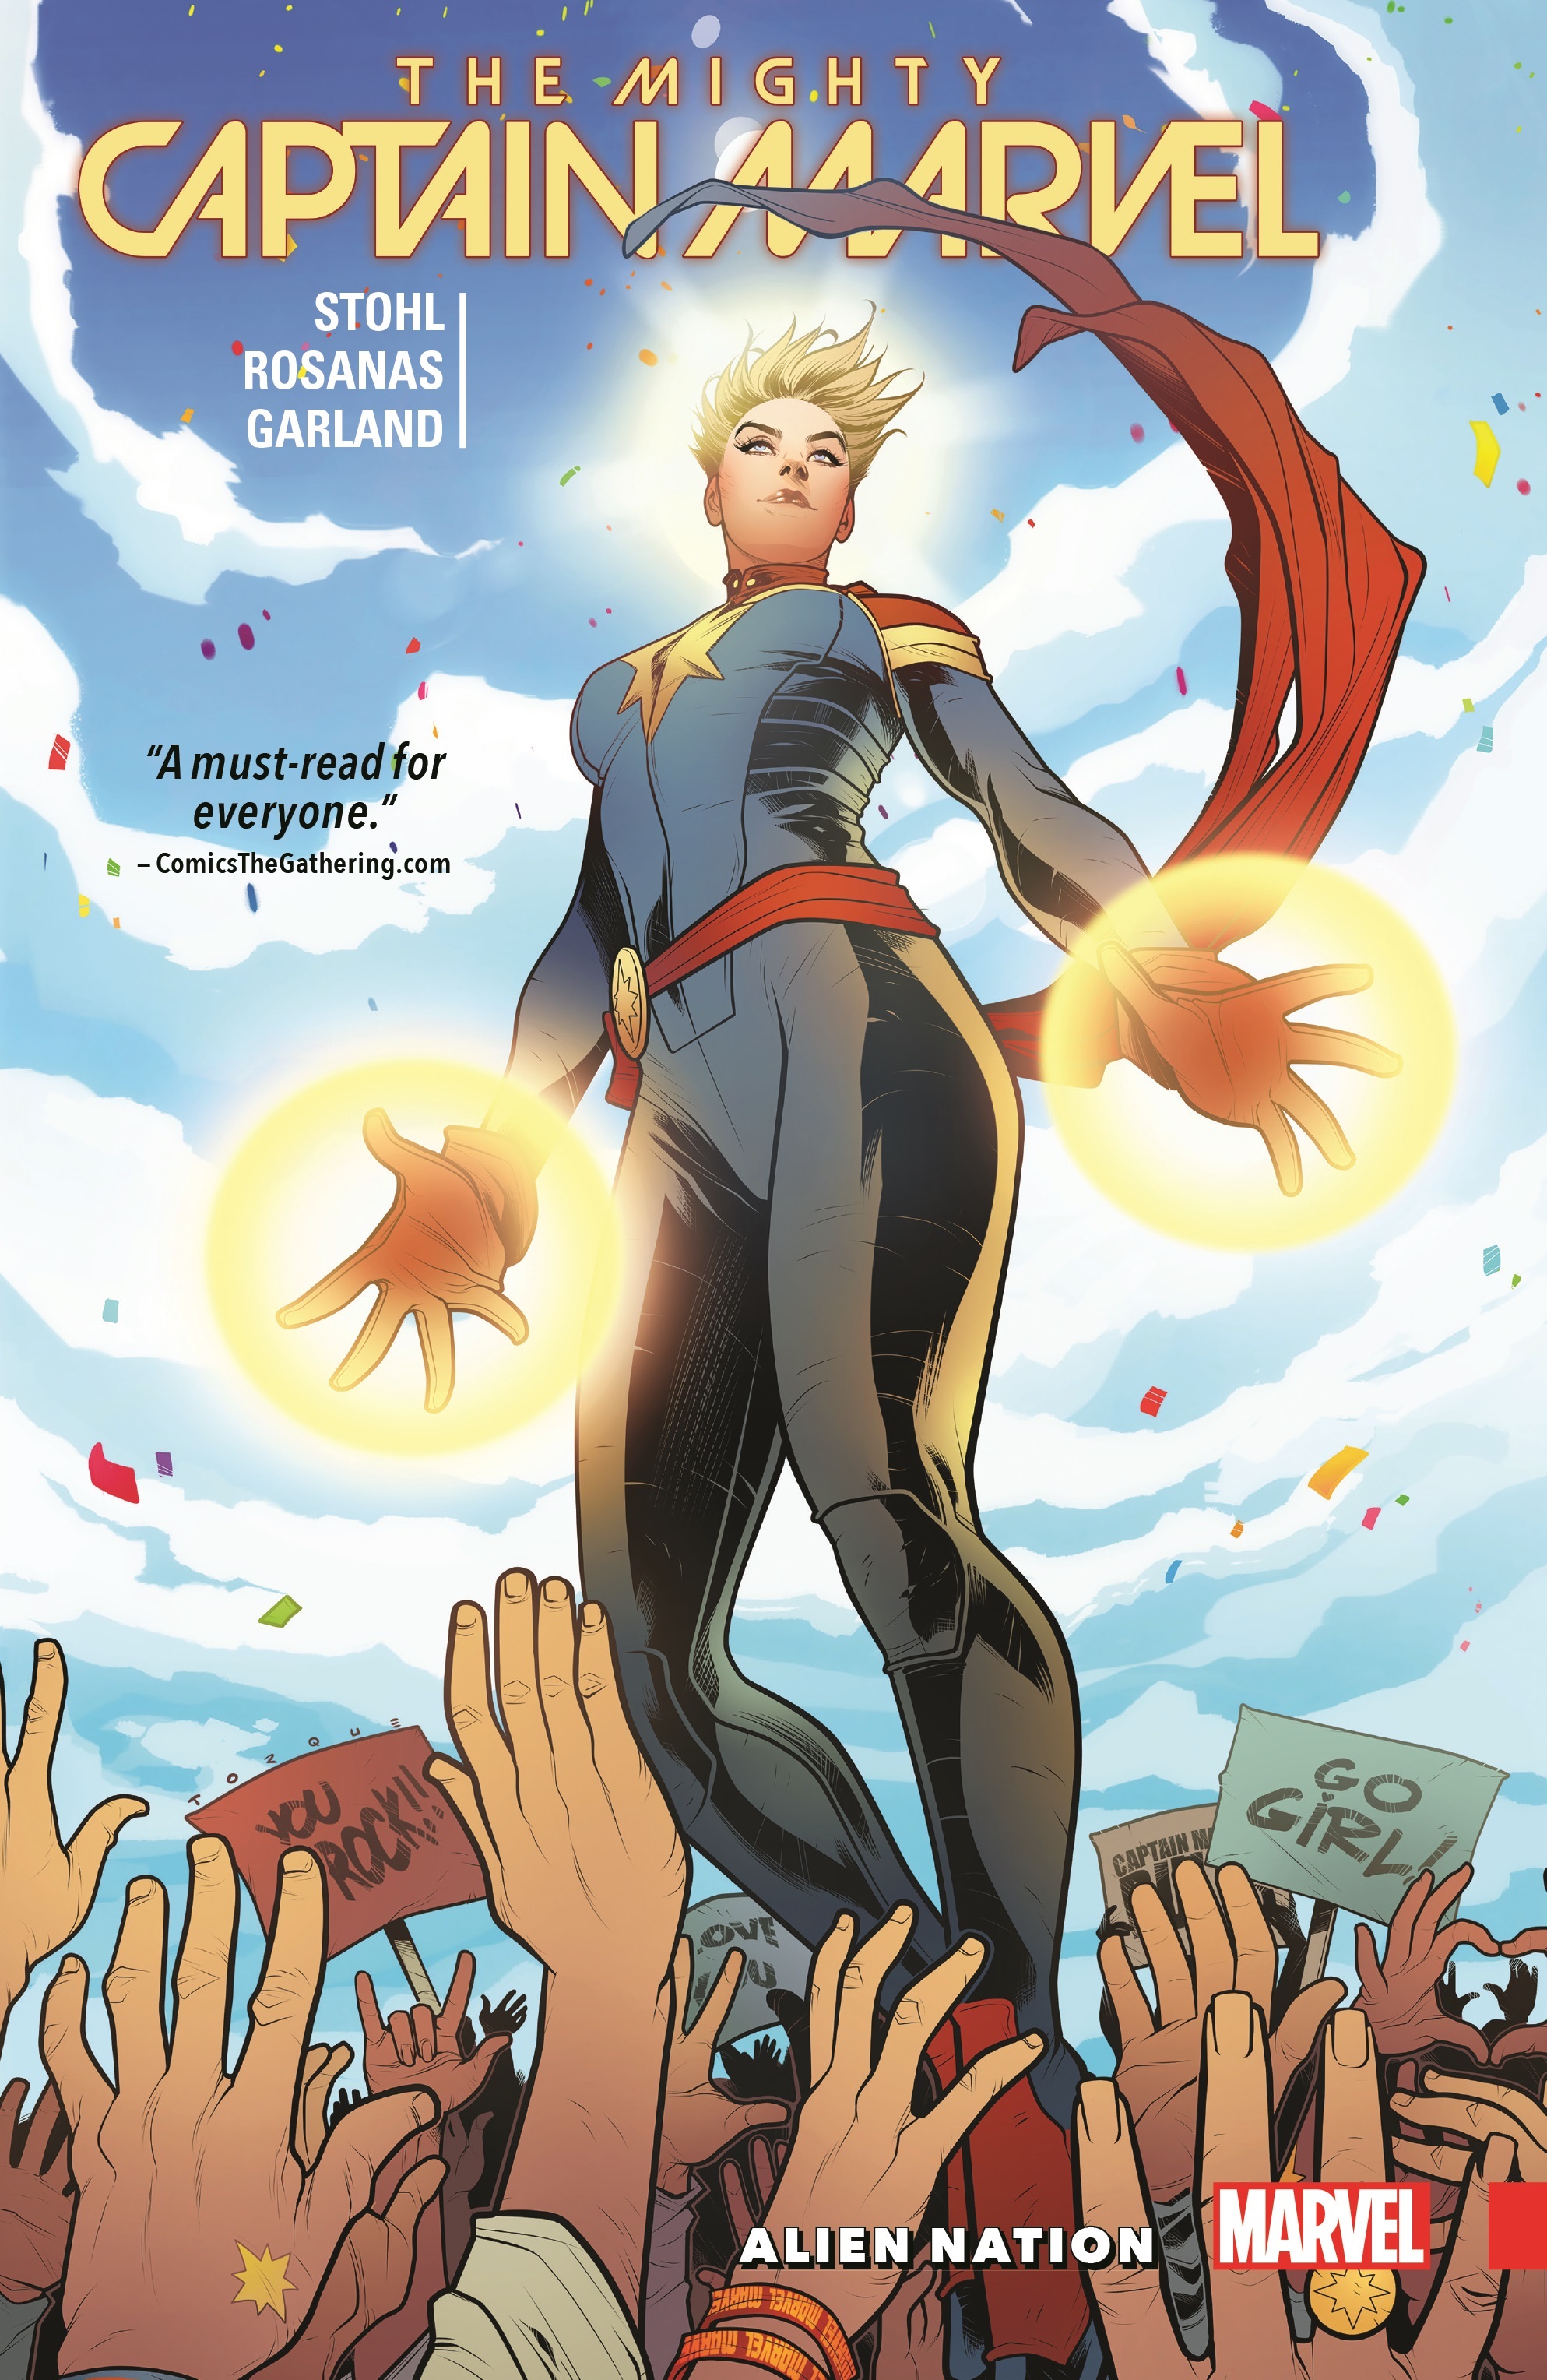 THE MIGHTY CAPTAIN MARVEL VOL. 1: ALIEN NATION TPB (Trade Paperback)